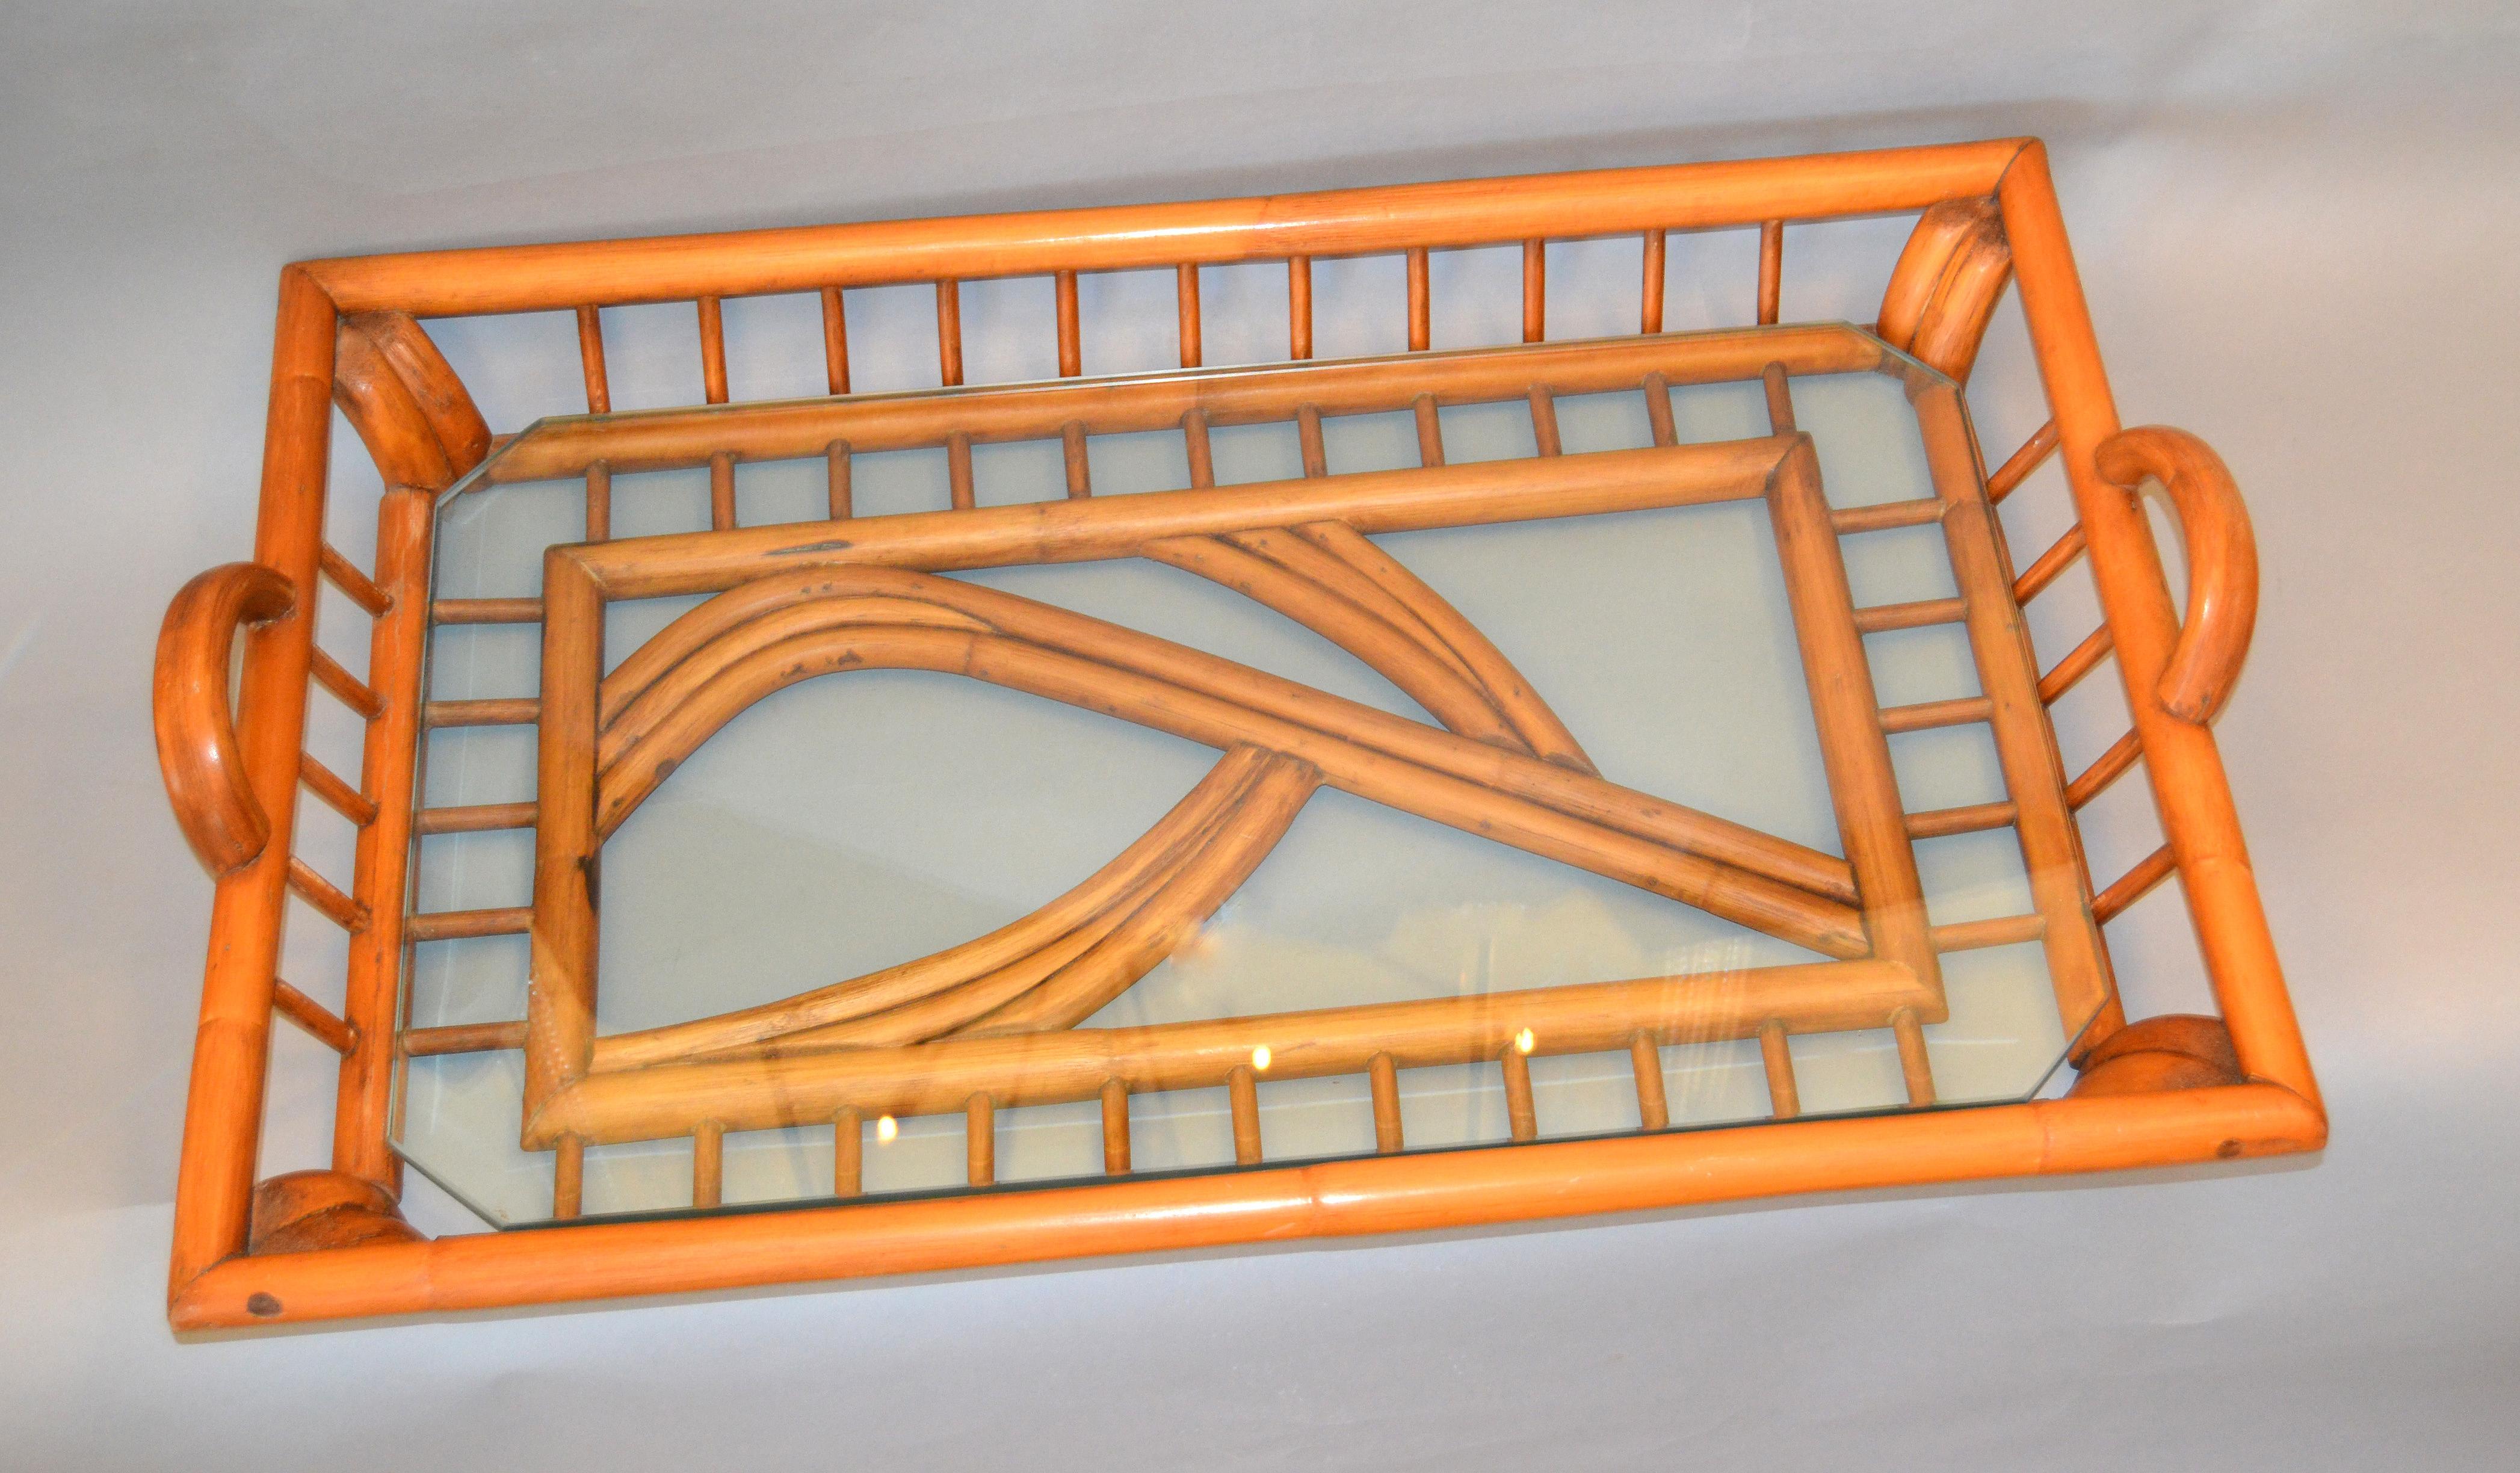 1940s Boho Chic Handcrafted Bamboo Wood & Glass Table Tray Serving Tray Platte For Sale 2